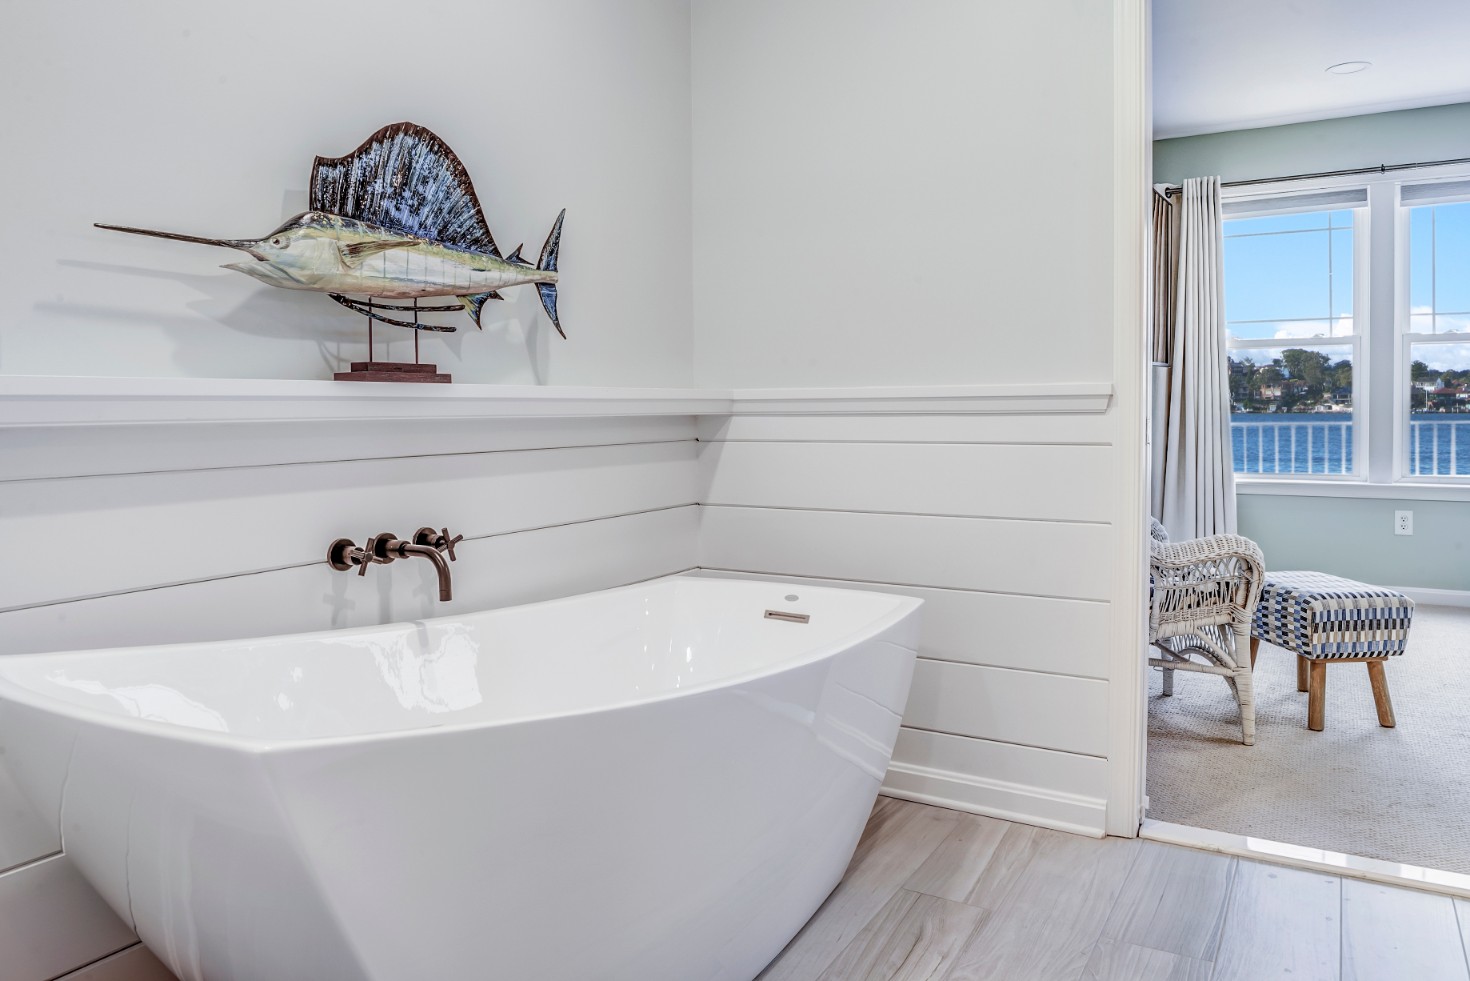 Hatteras Drive Master Suite in Bethany Beach DE - Master Bathroom with White Free Standing Bathtub and Marlin